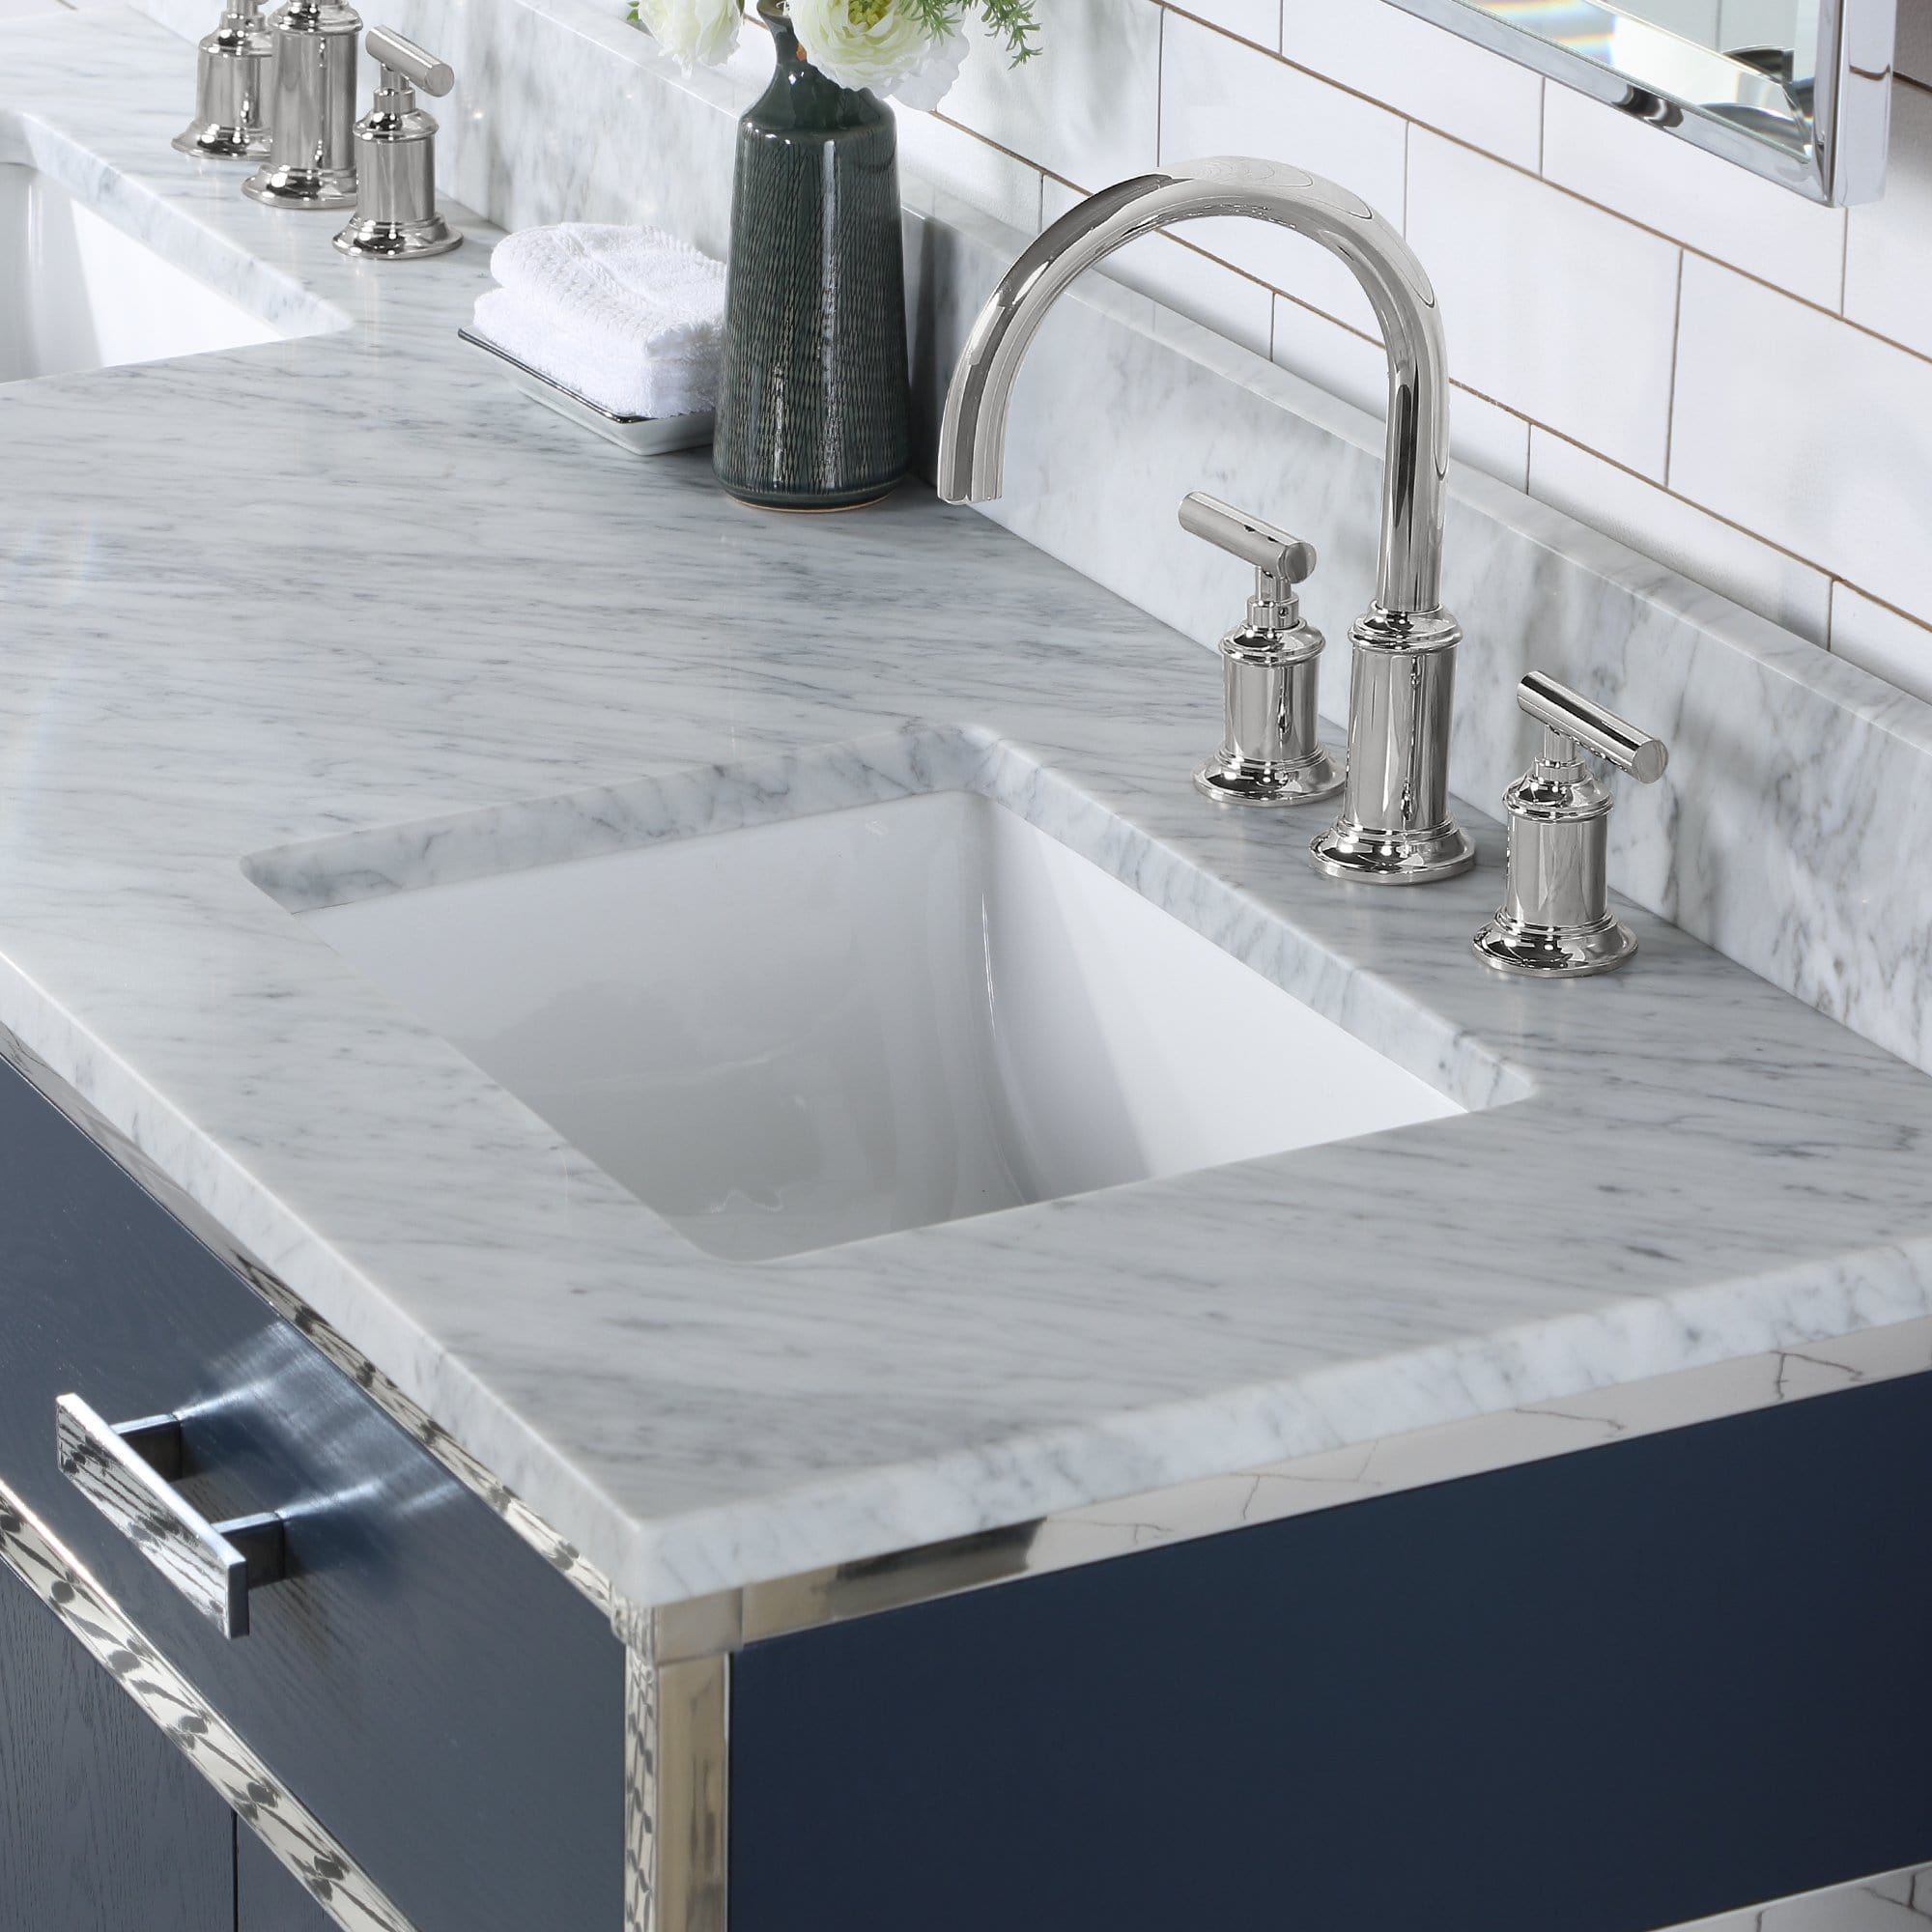 Water Creation Marquis 72 In. Double Sink Carrara White Marble Countertop Vanity in Monarch Blue with Hook Faucets - Molaix732030765986Bathroom vanityMQ72CW01MB-000BL1401